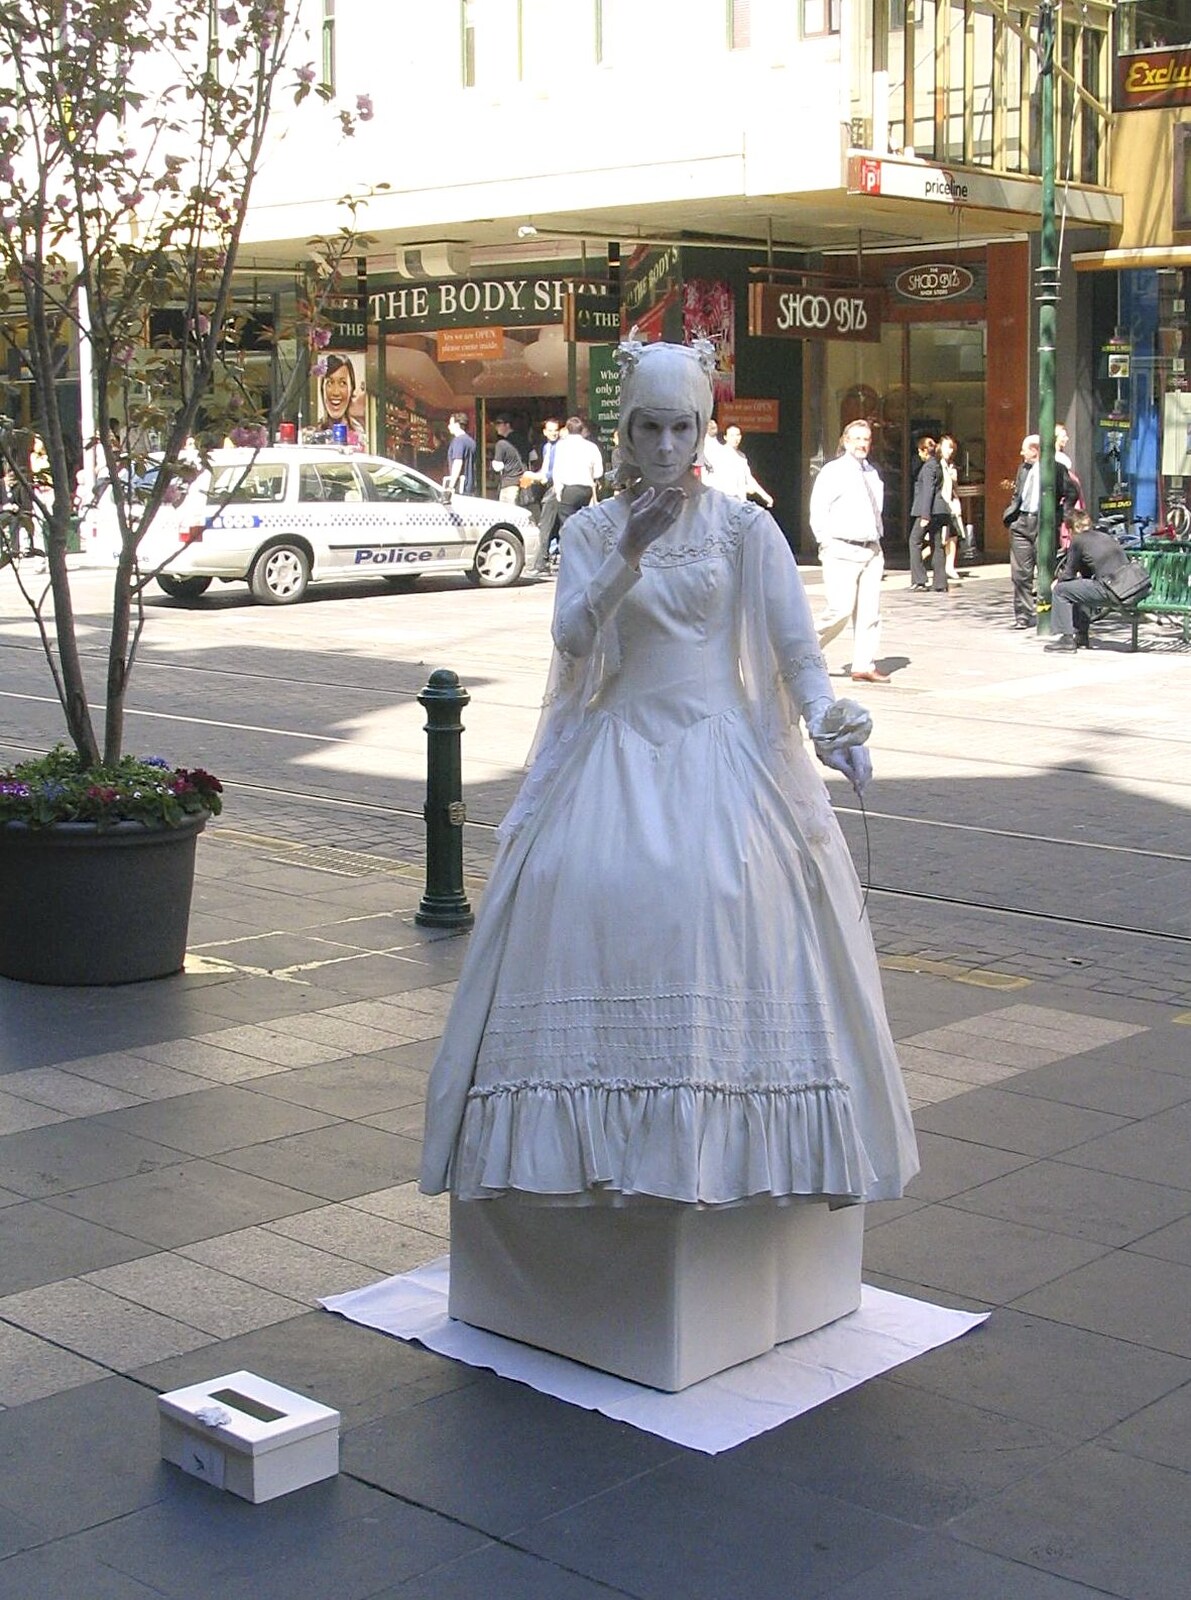 A living statue on a box from A Couple of Days in Melbourne, Victoria, Australia - 5th October 2004